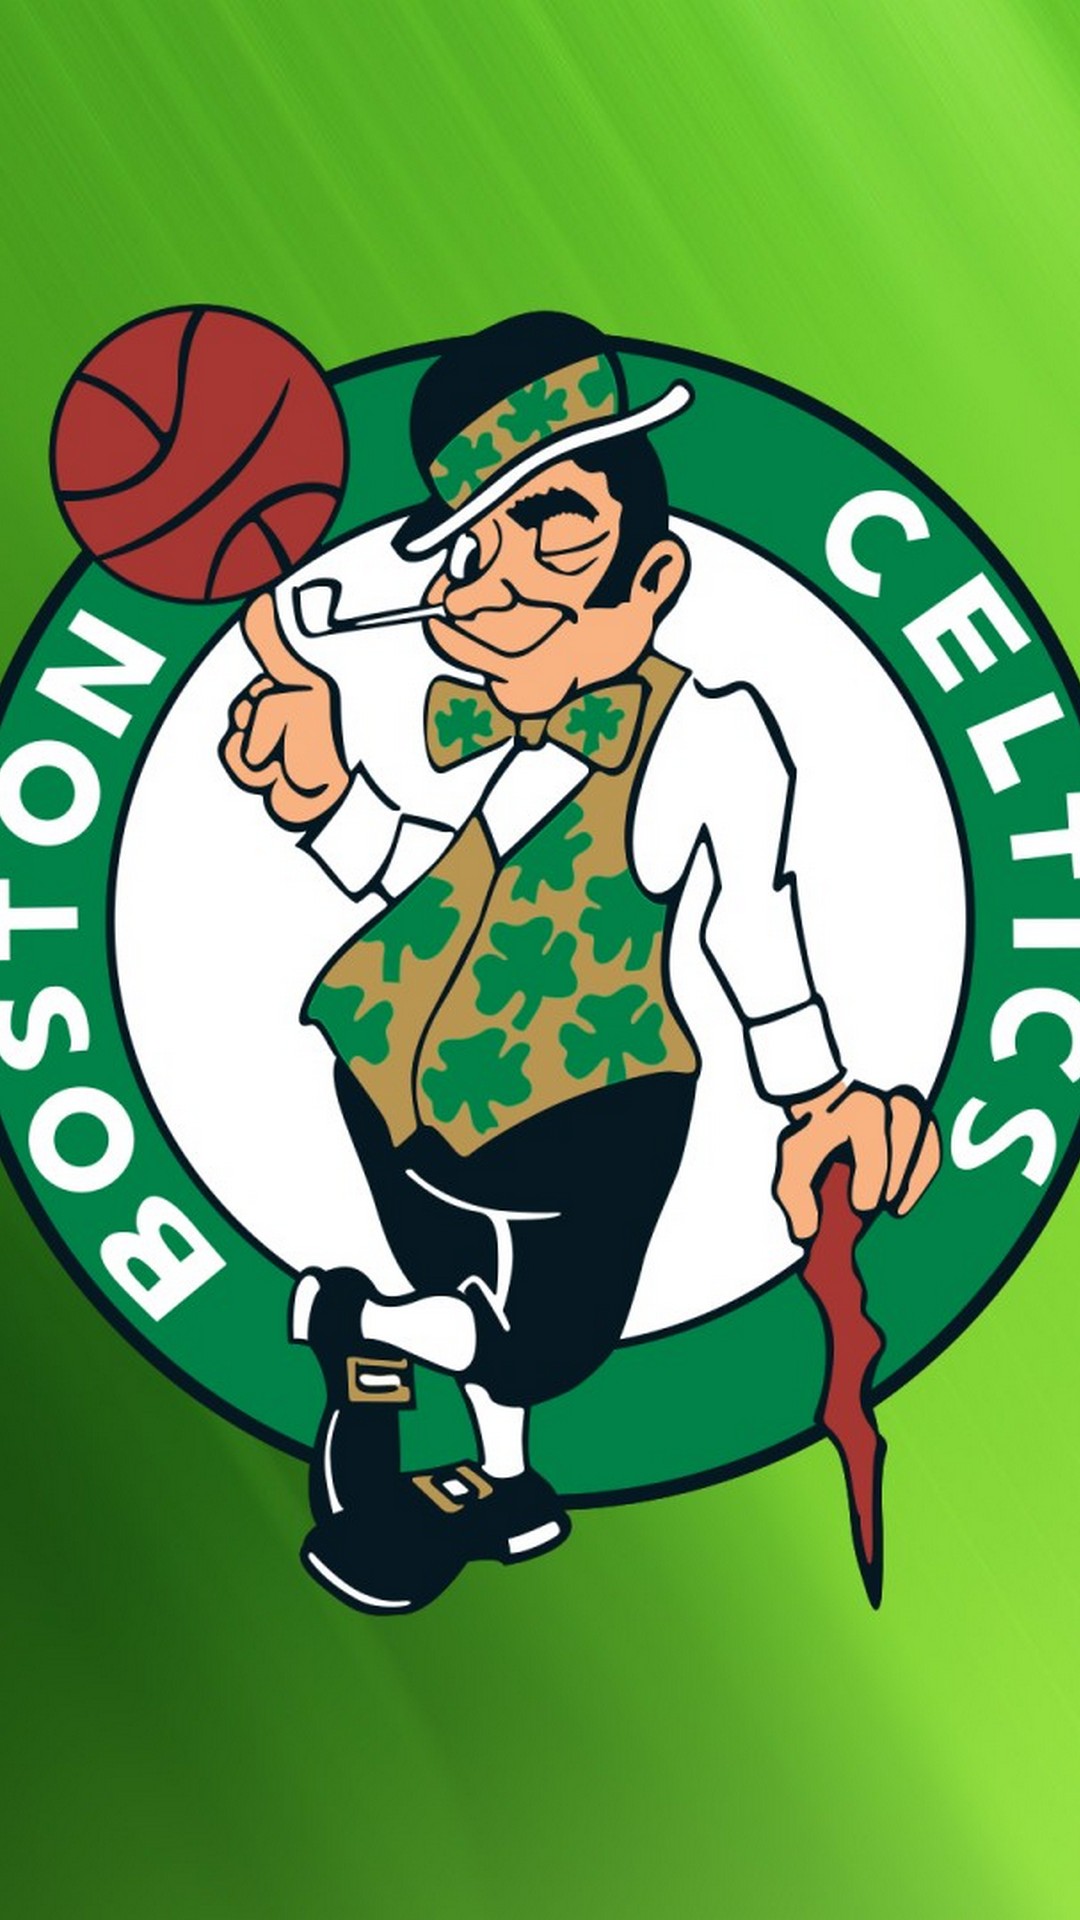 iPhone 7 Wallpaper Boston Celtics with resolution 1080X1920 pixel. You can make this wallpaper for your iPhone 5, 6, 7, 8, X backgrounds, Mobile Screensaver, or iPad Lock Screen